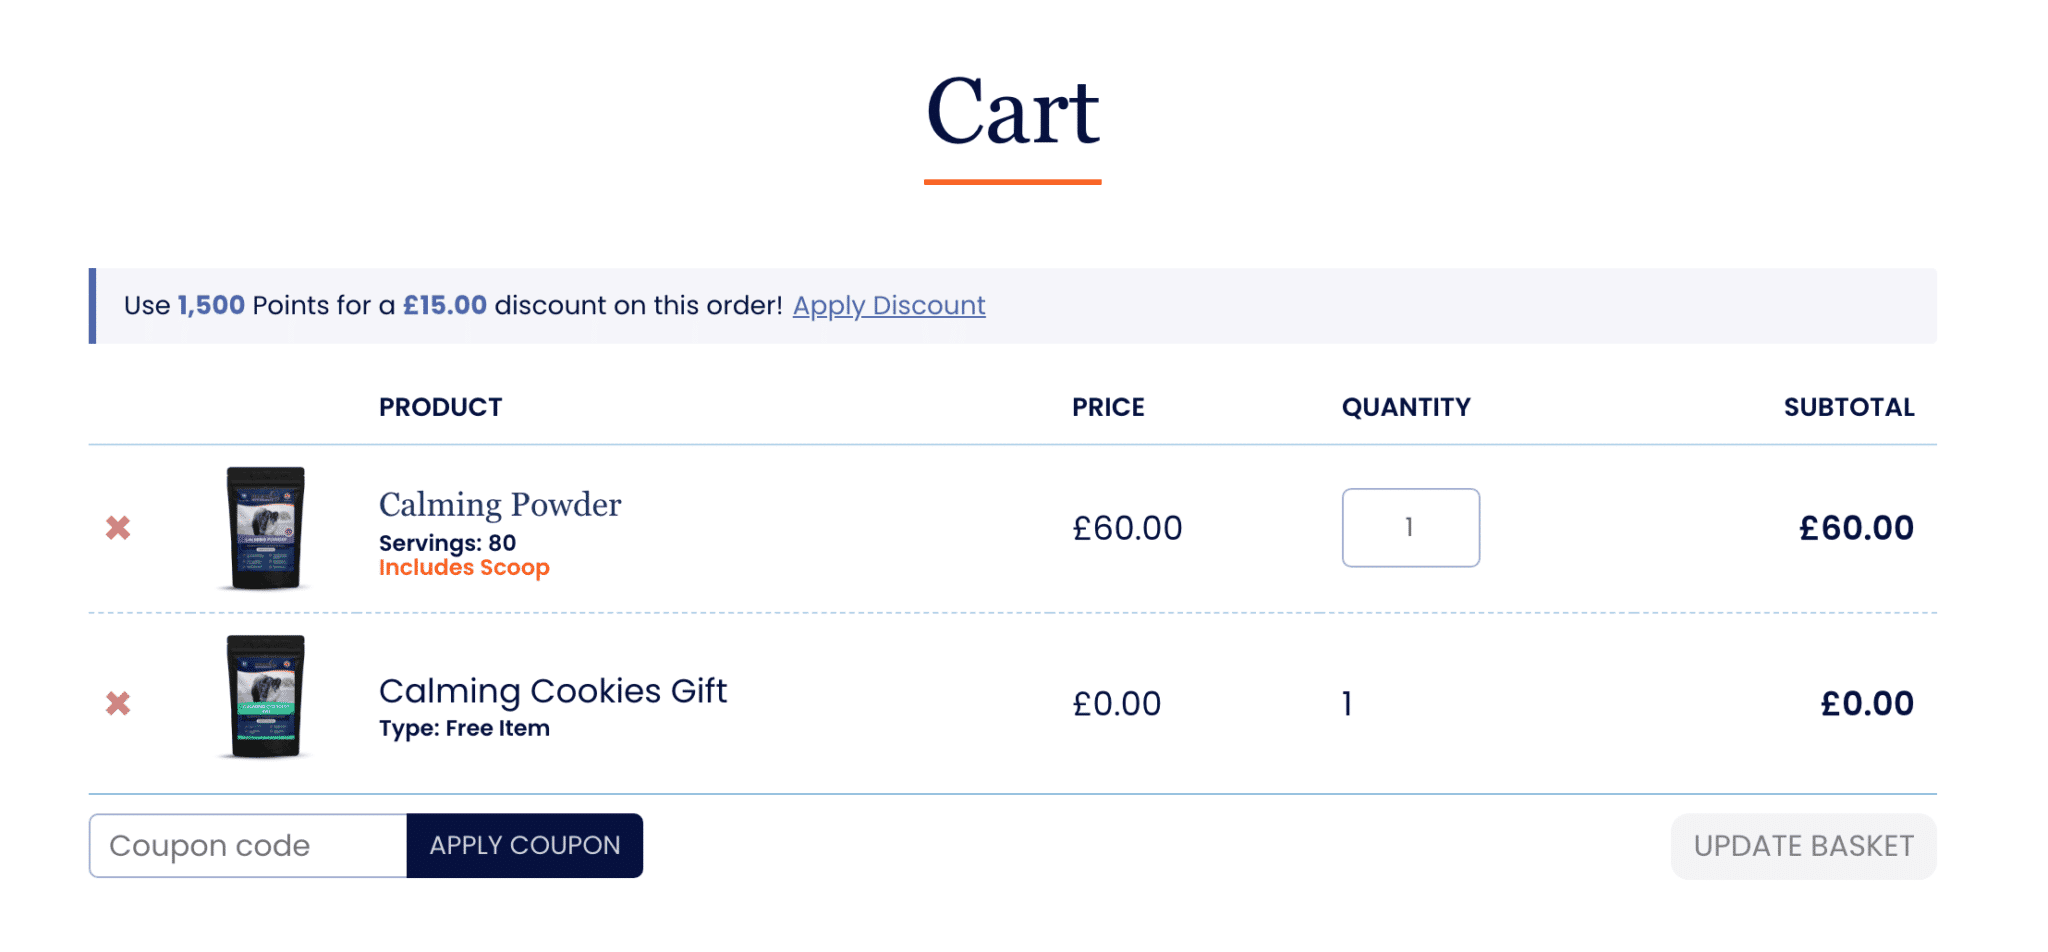 cart-discount-loyalty-1.png